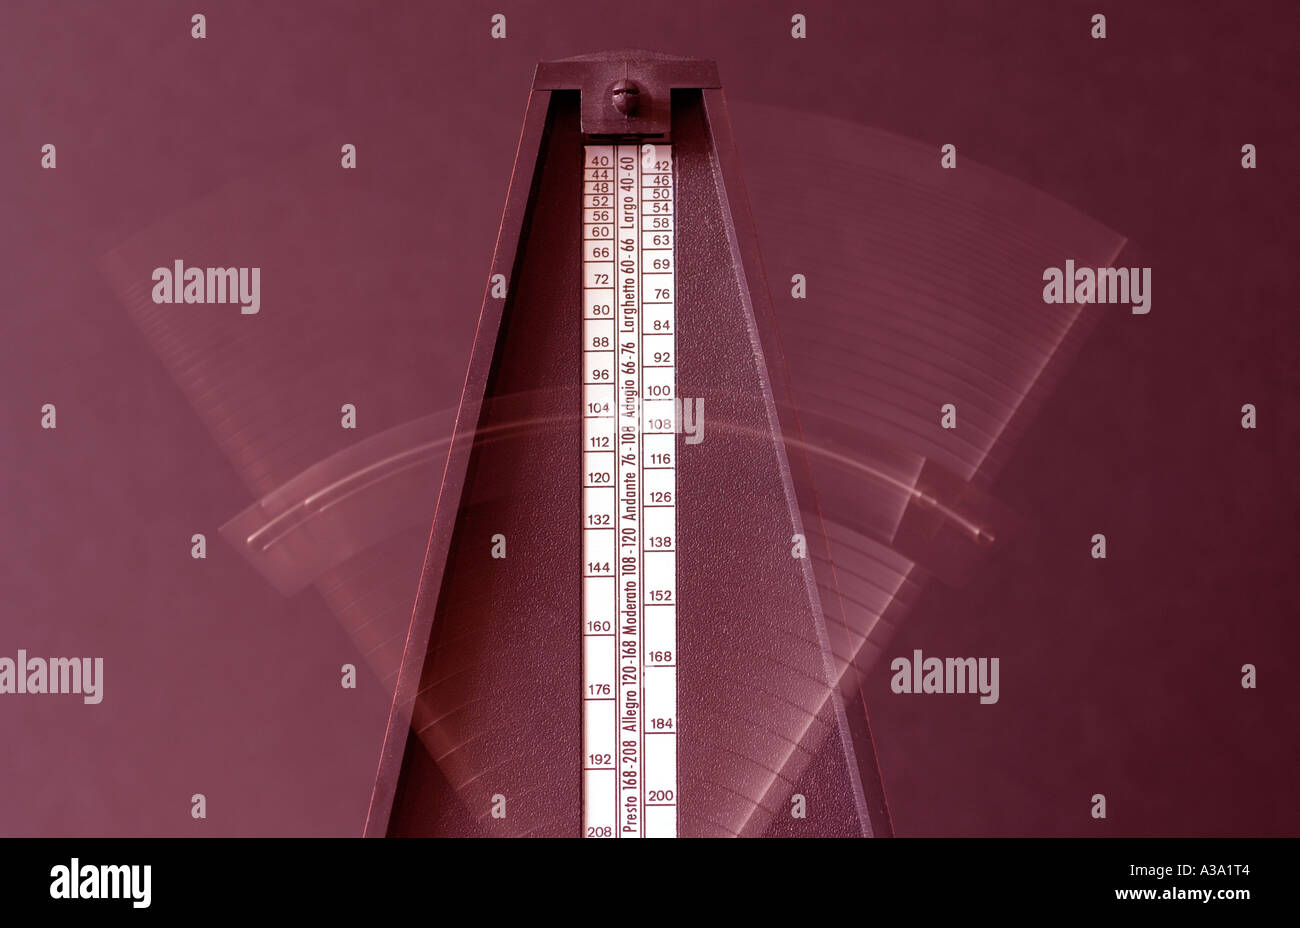 Blurred moving arm on a musicians mechanical metronome. Credit: Malcolm Park/Alamy. Stock Photo